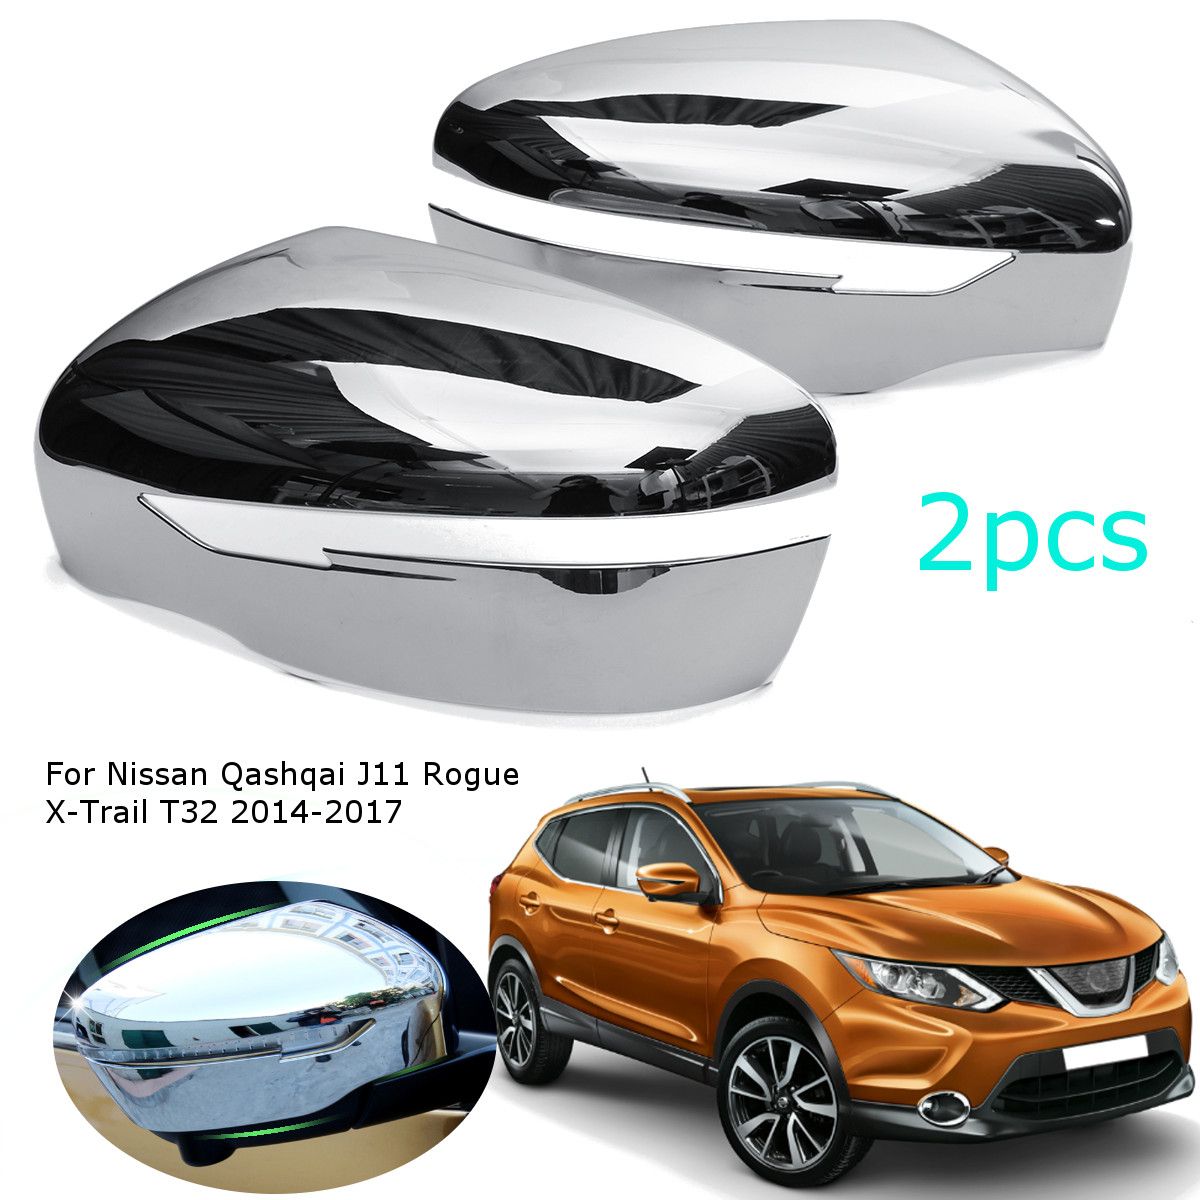 Car-Chrome-Styling-Rearview-Mirror-for-Nissan-Qashqai-J11-Rogue-X-Trail-T32-2014-2015-2016-2017-1351140